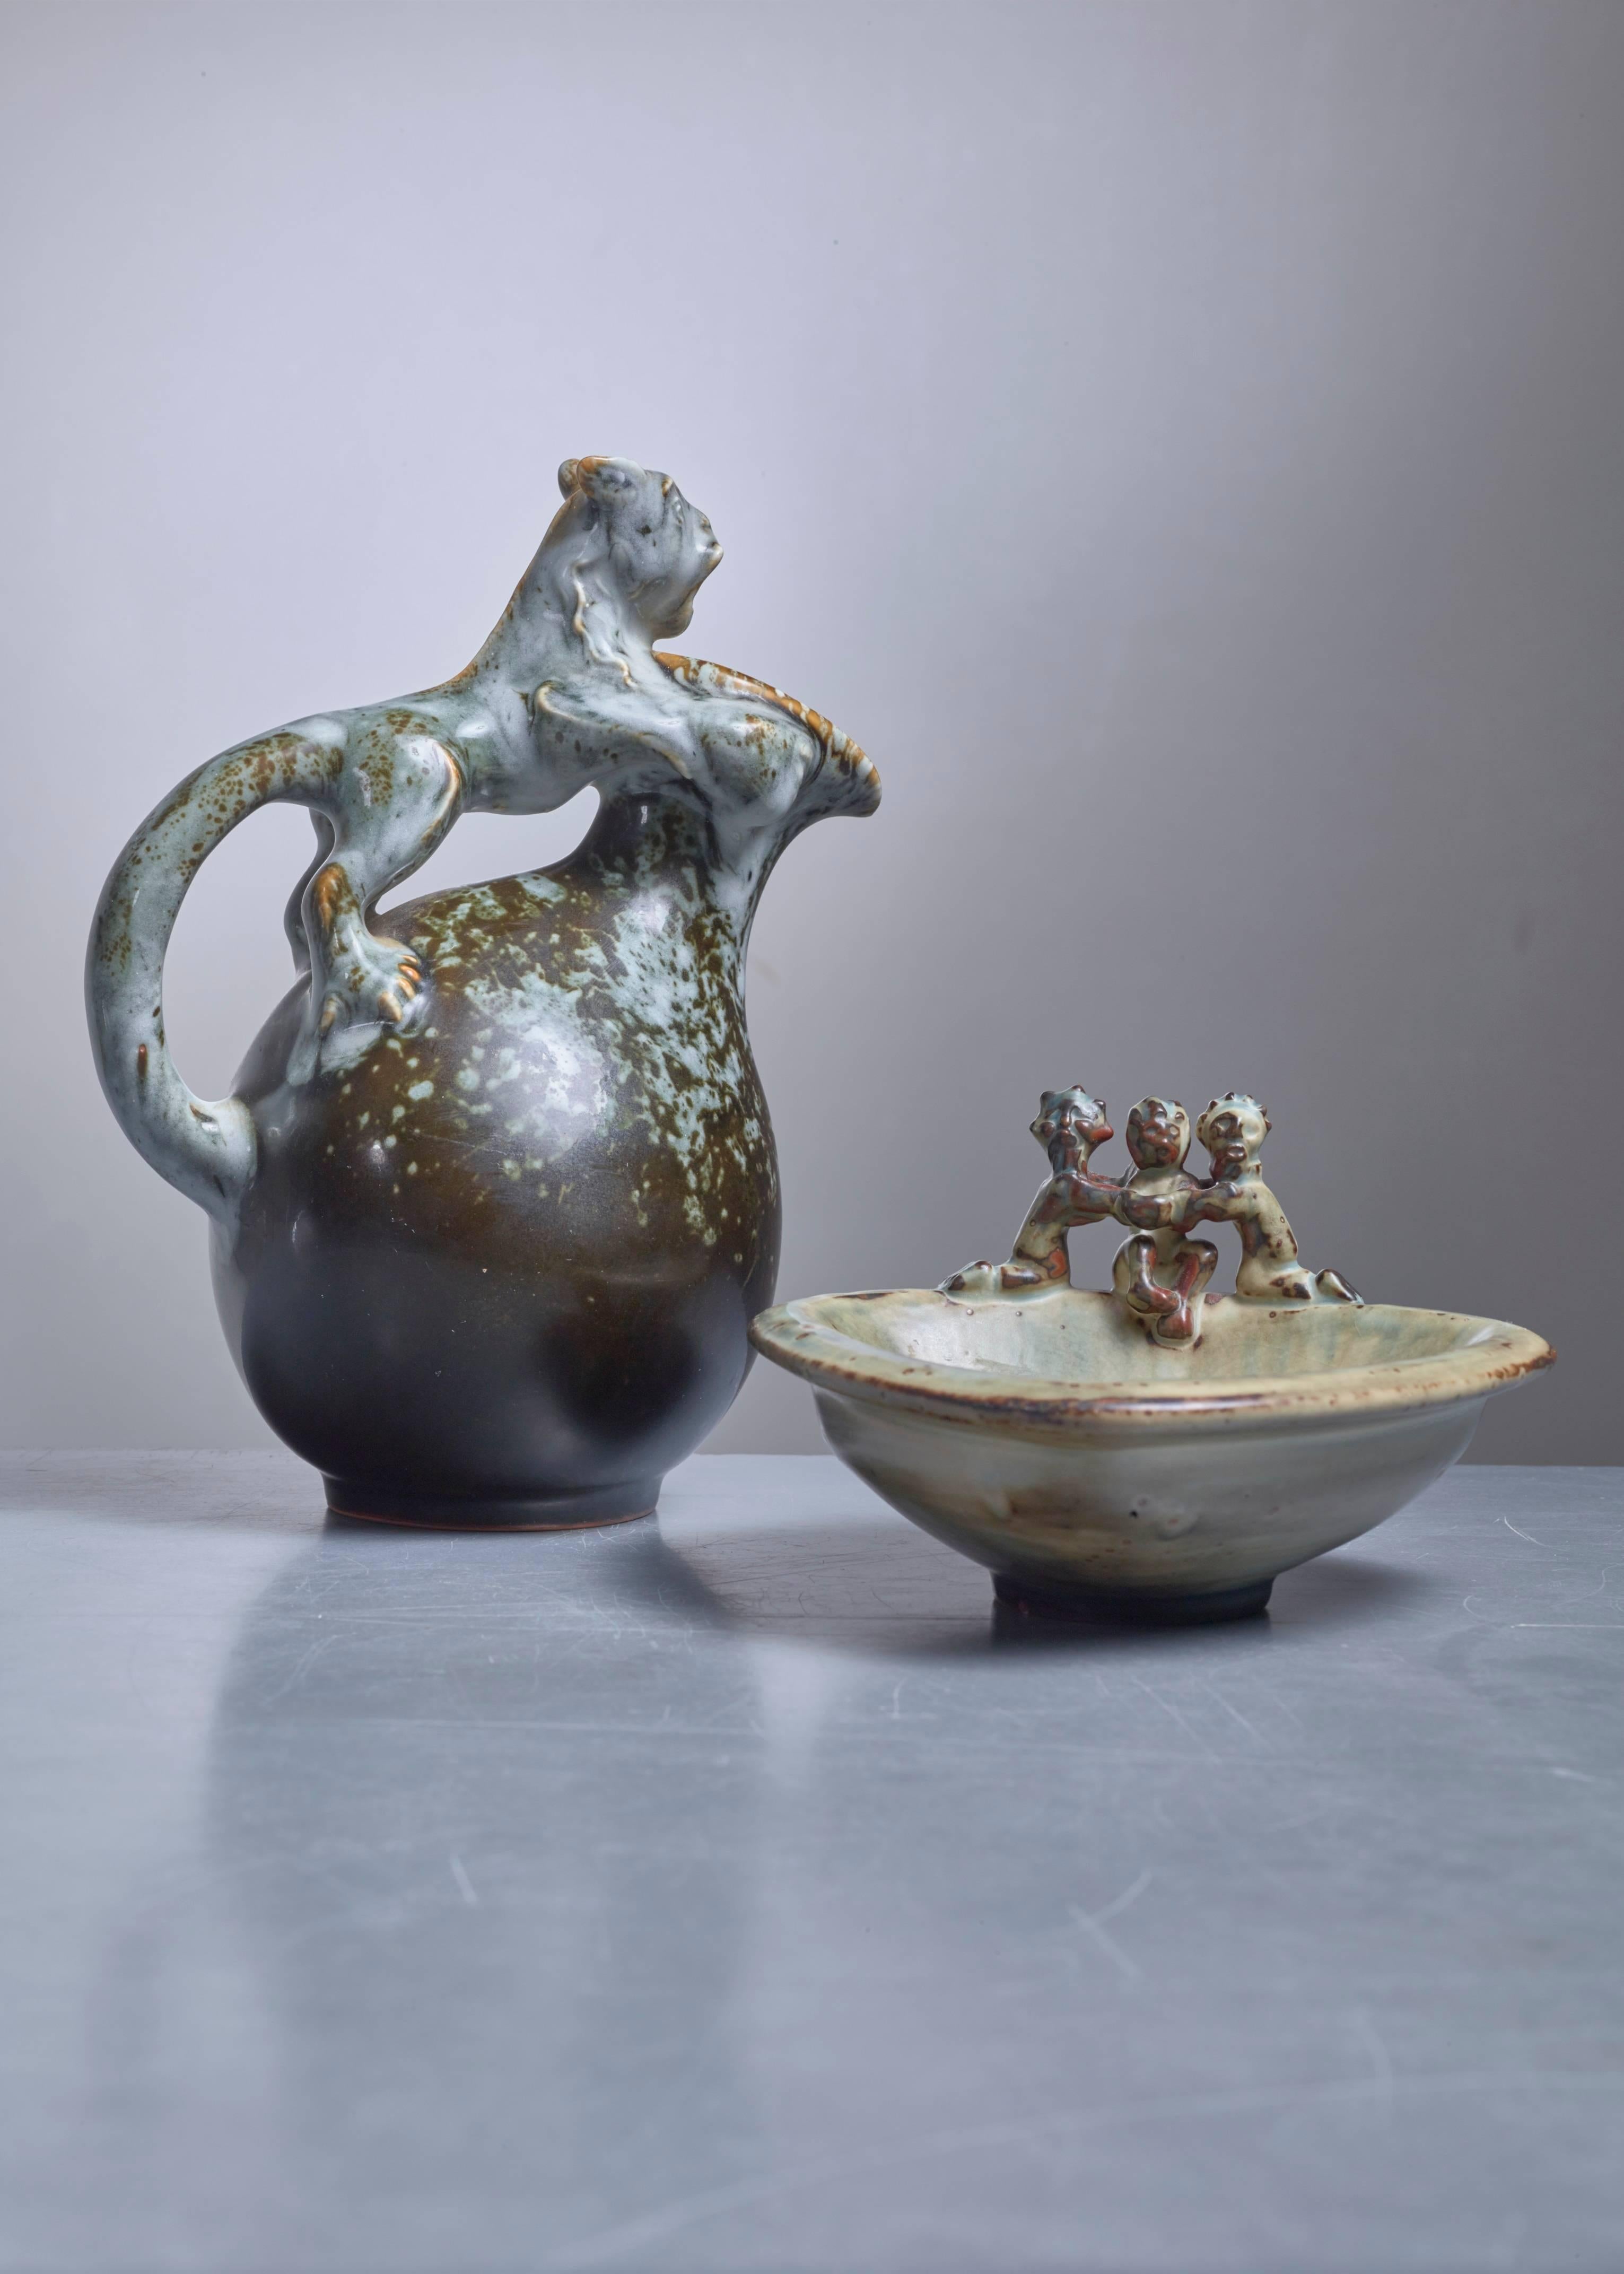 A stoneware set by Bode Willumsen for Royal Copenhagen. The jug has a lynx as a handle. The triangular ashtray or bowl has three figures sitting on the rim.
The height of the pieces is 21 (8.3 inch) and 10 cm (4 inch). Signed with monogram

Bode